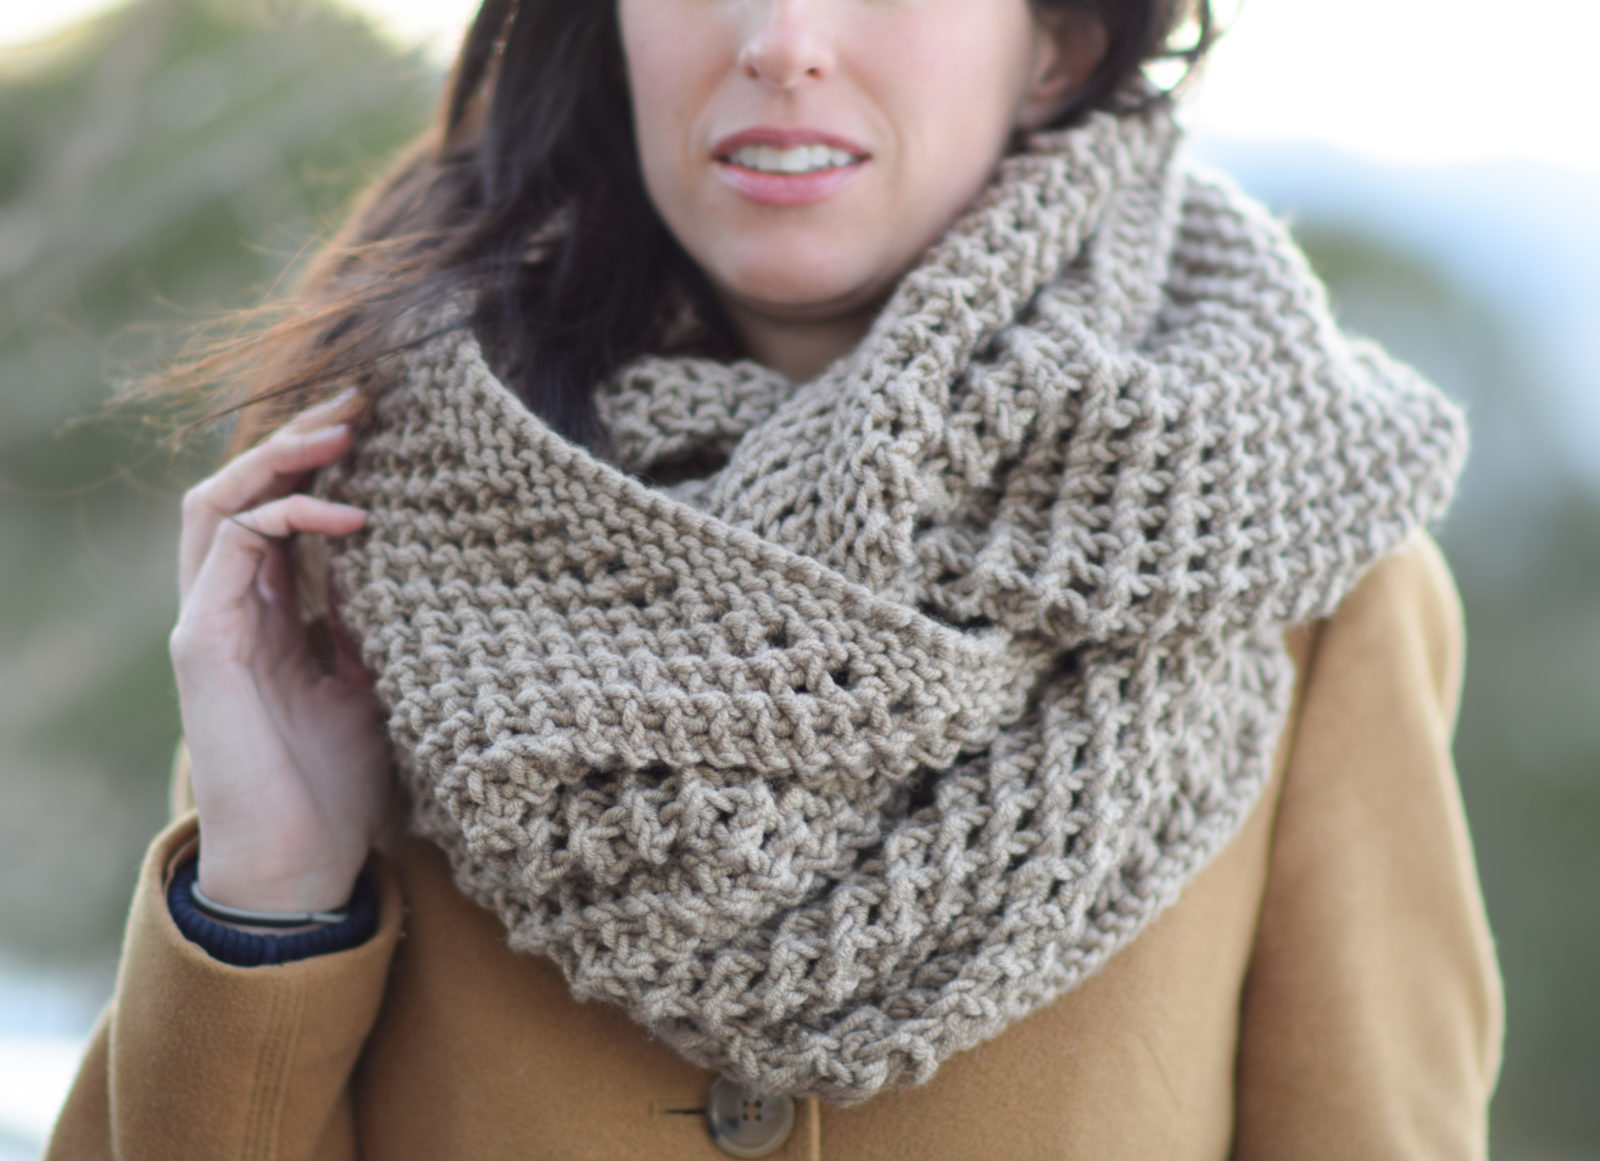 The Traveler Knit Infinicowl Scarf Pattern Mama In A Stitch